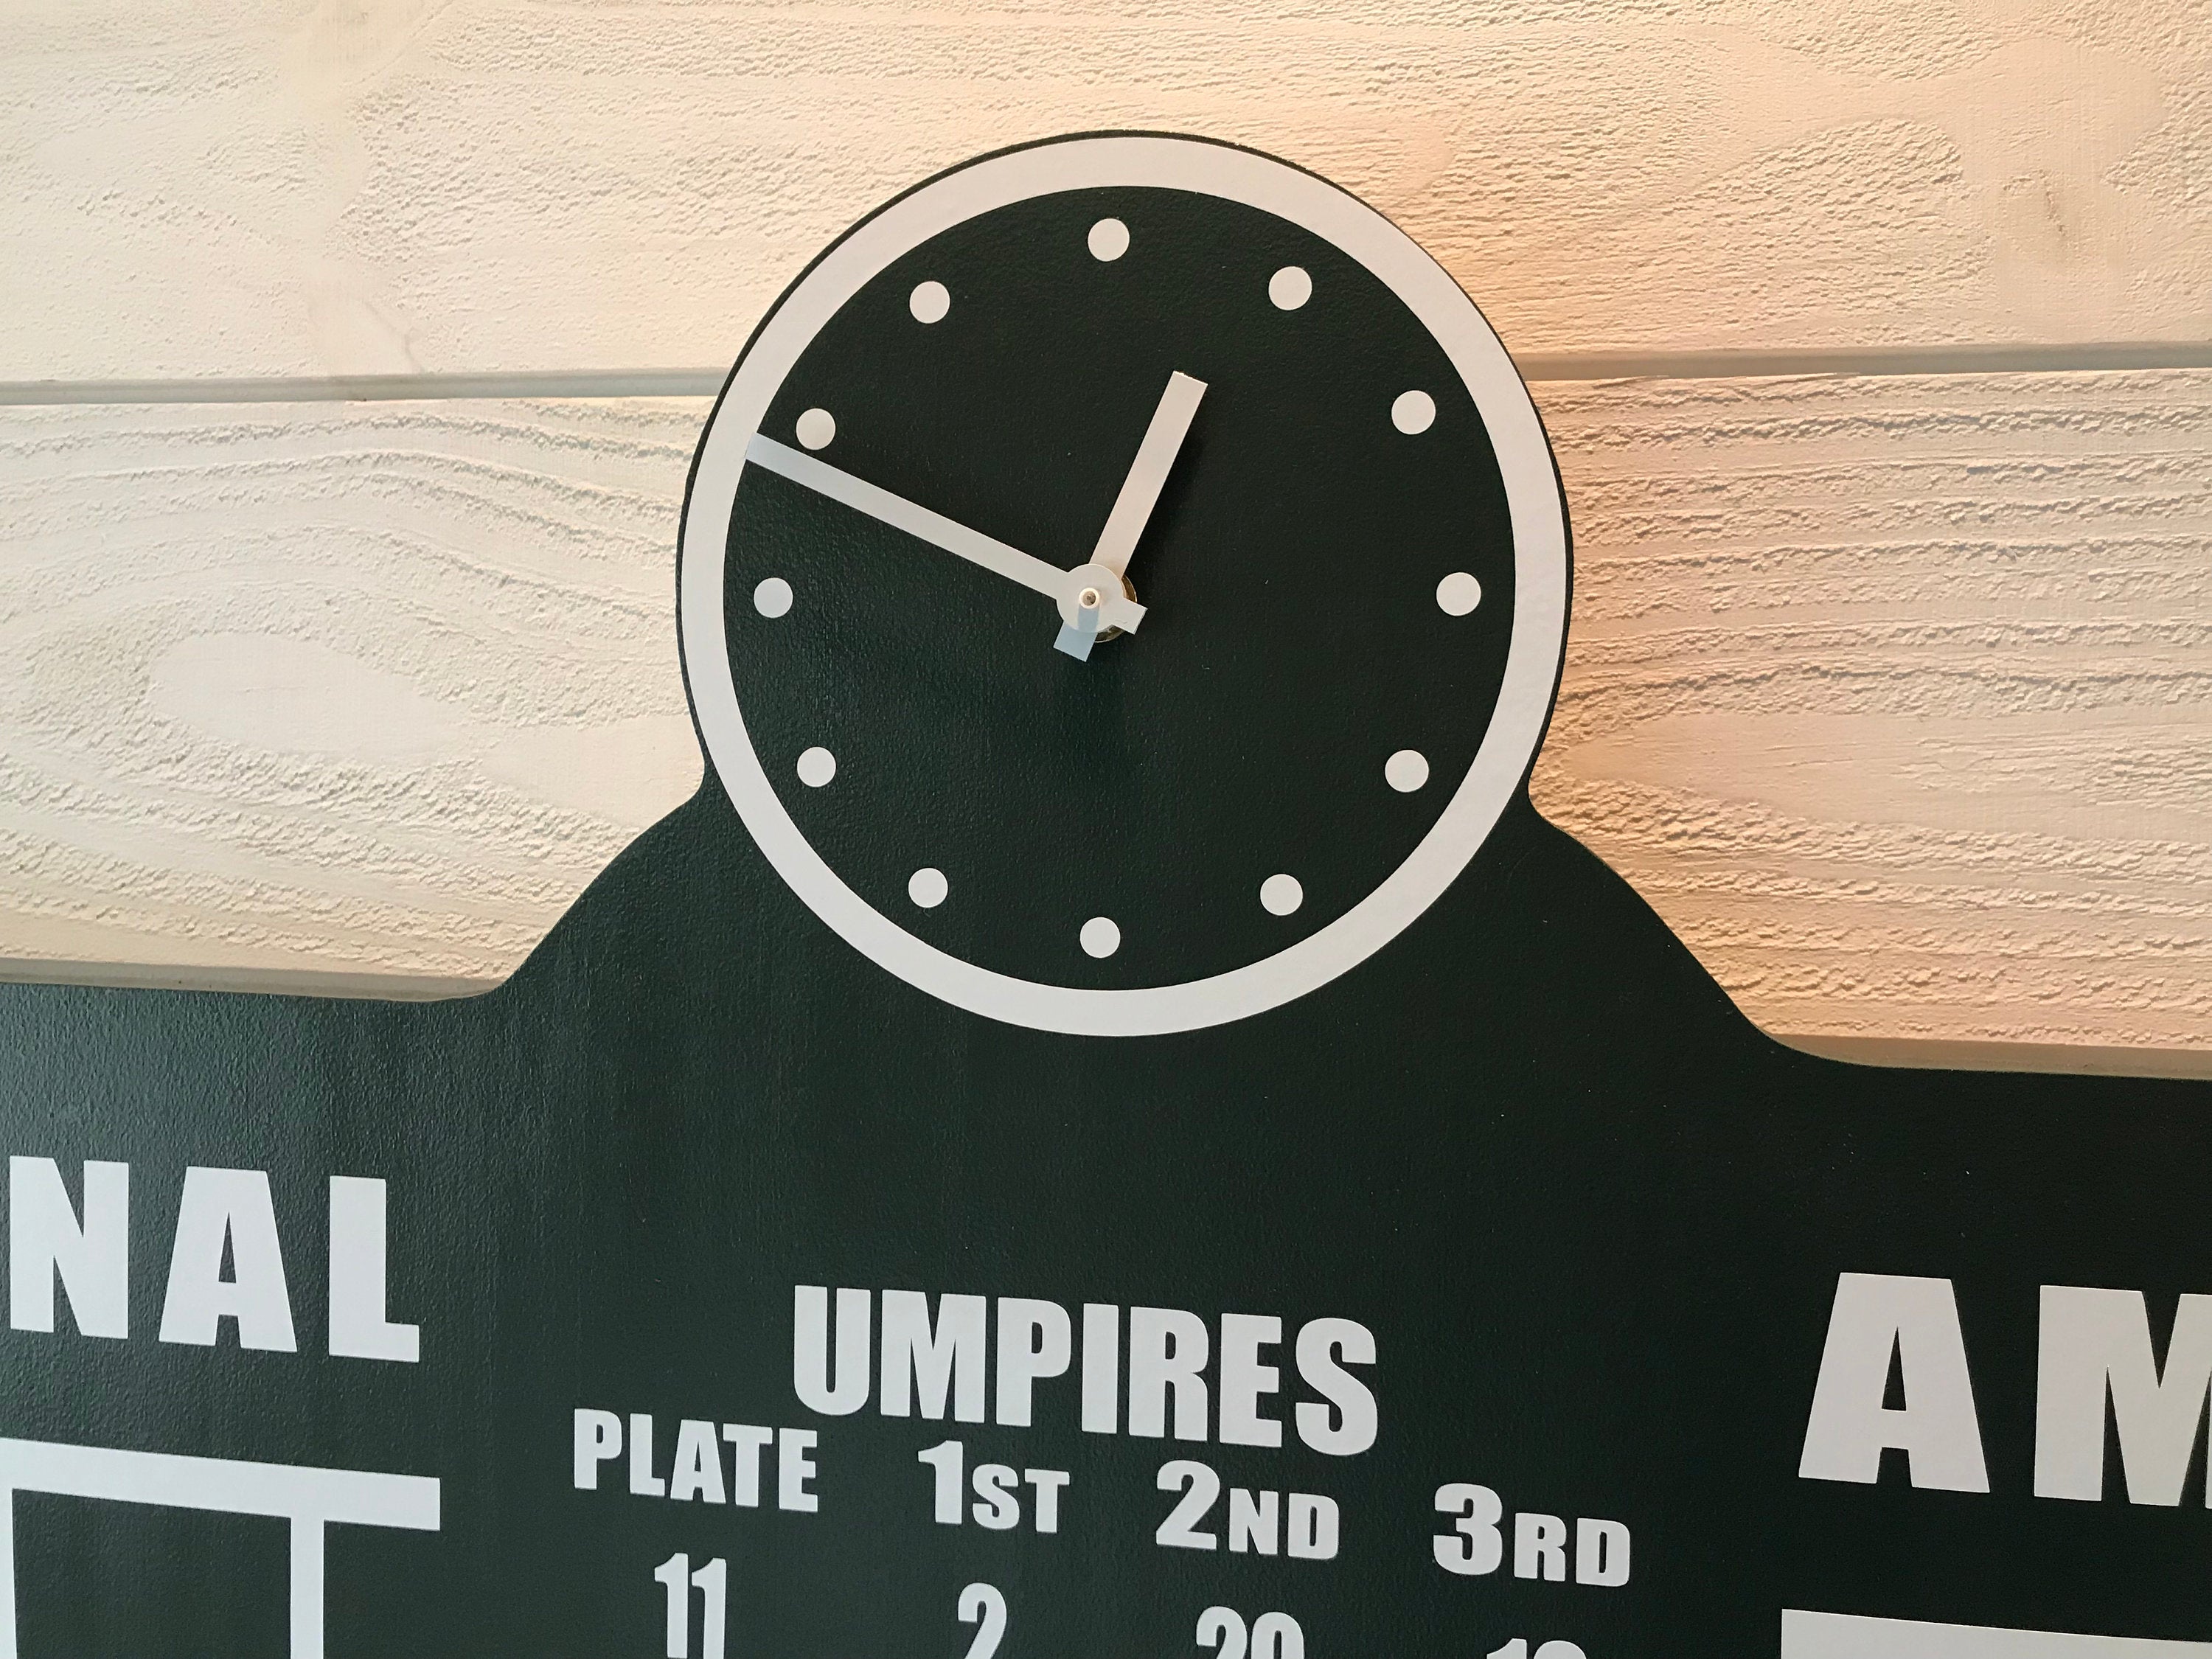 WRIGLEY FIELD SCOREBARD CLOCK IS CHICAGO CUBS GAME